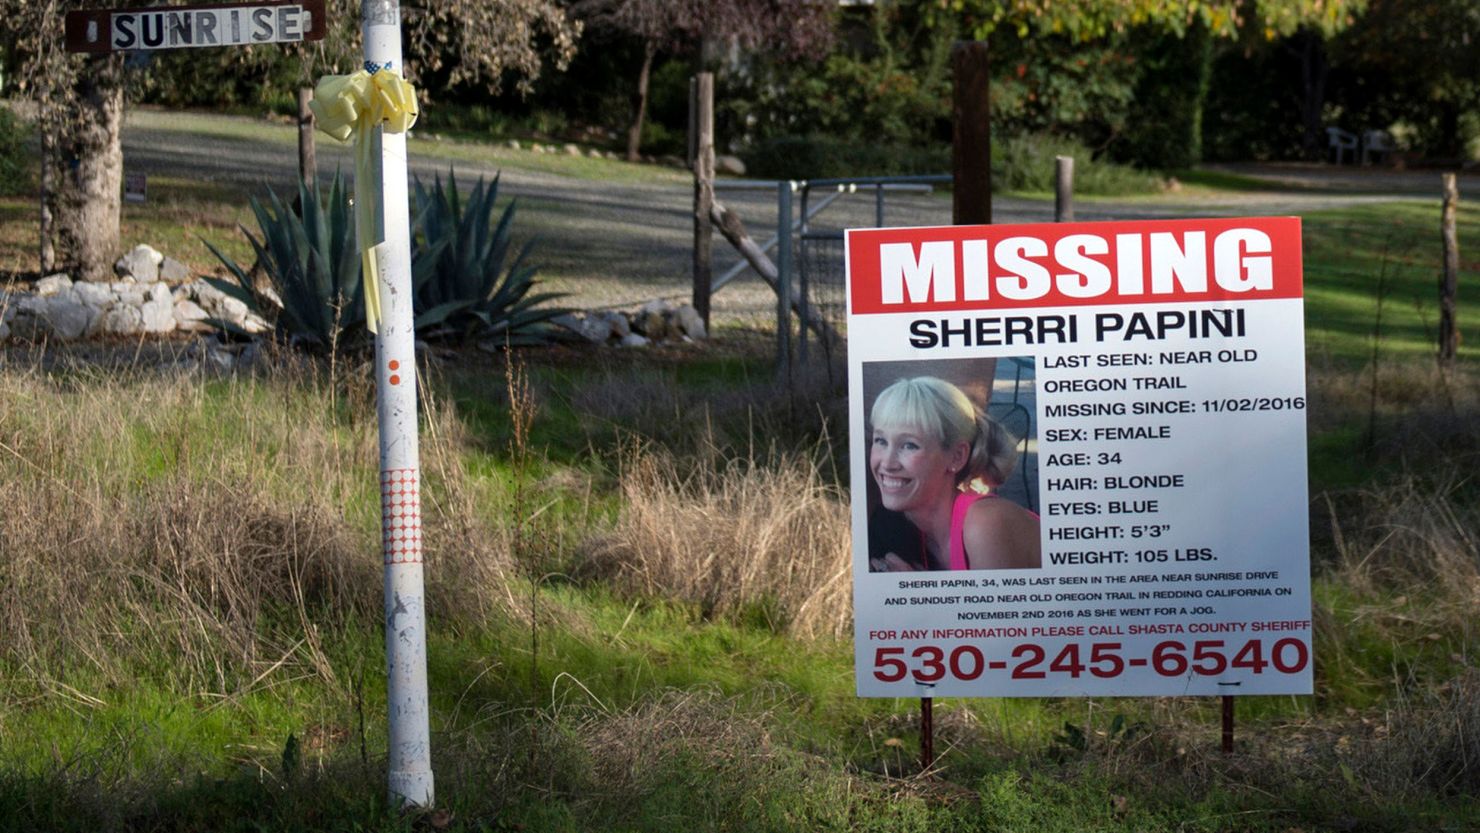 A "missing" sign for Sherri Papini is seen in November 2016 along Sunrise Drive, near the location where she was believed to have gone missing while on an afternoon jog.